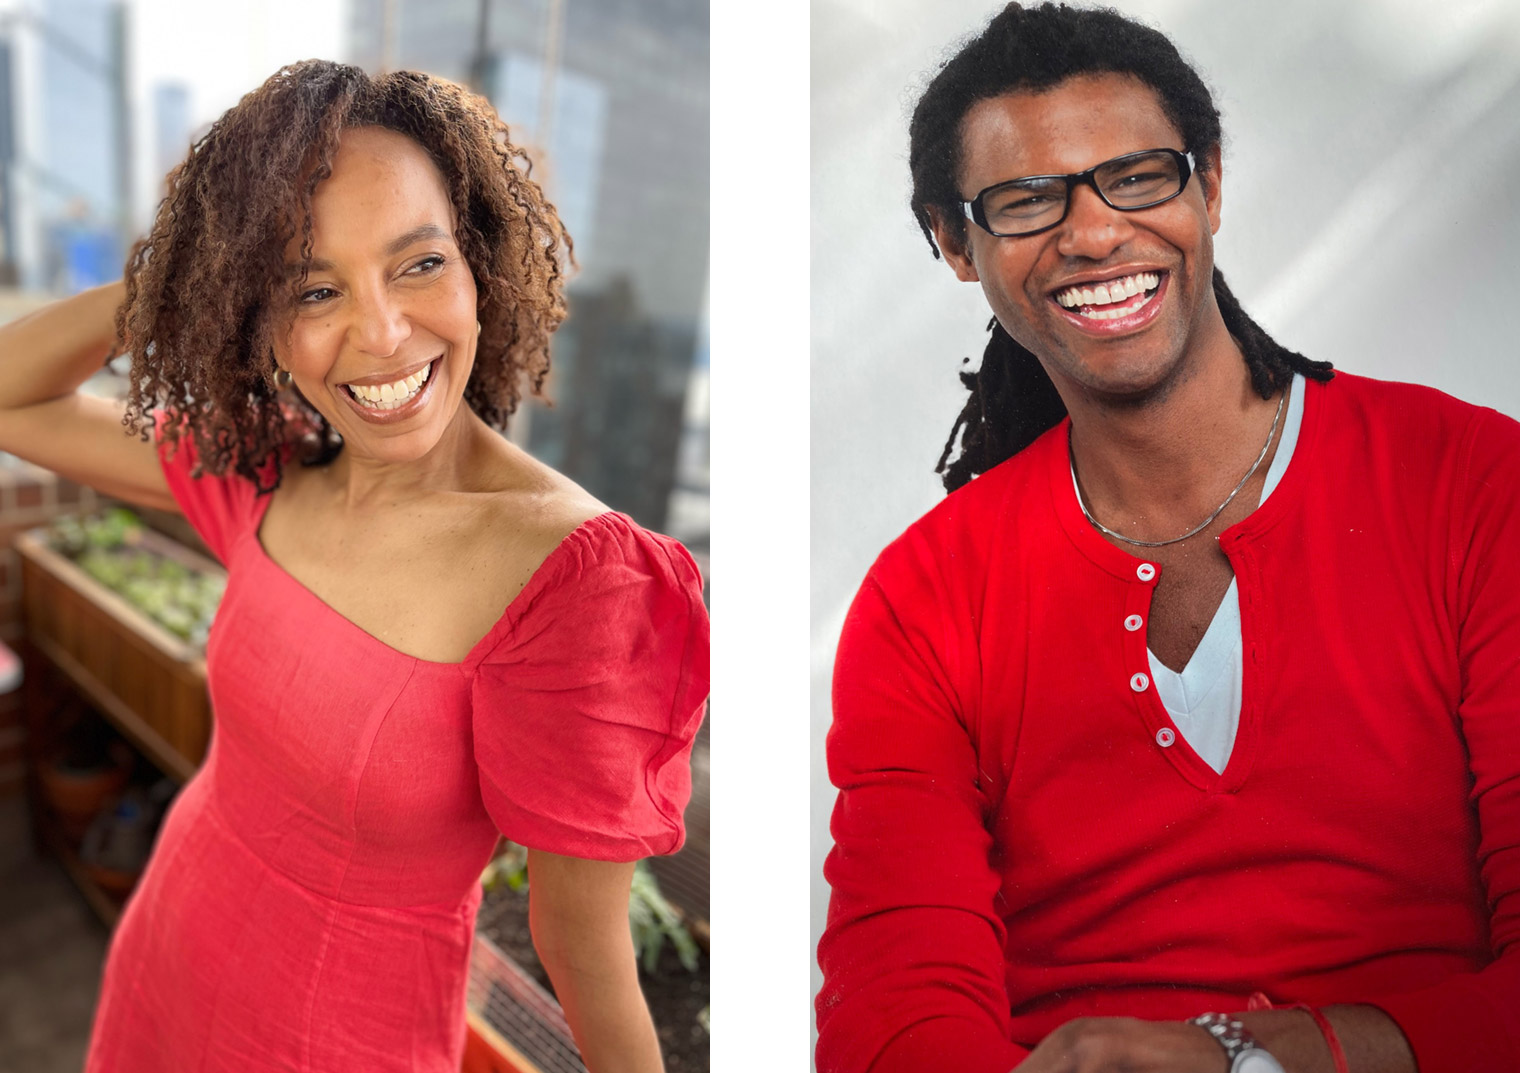 Composite of two headshots: one of a woman in a red dress and on the right a man wearing a red button down shirt